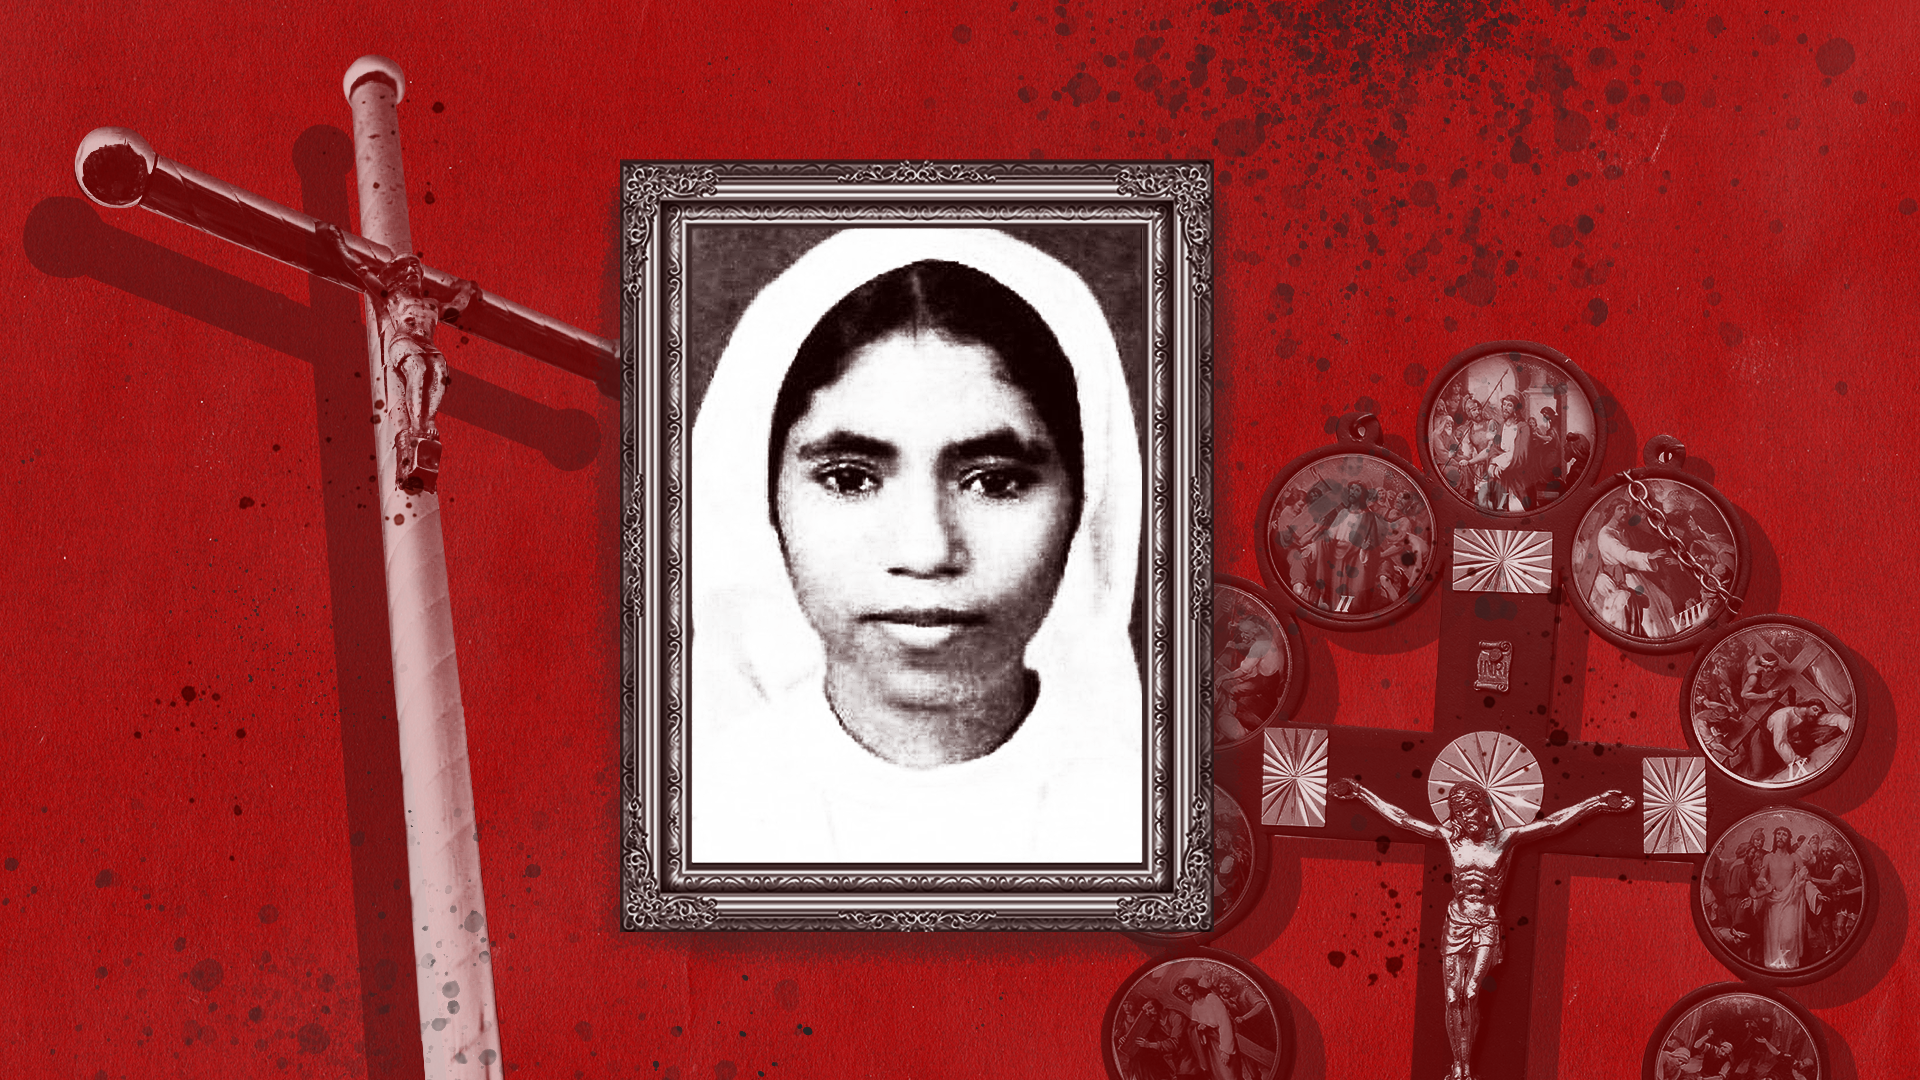 Virgin Sister Sleeping Sex - Sister Abhaya was murdered for catching an Indian priest and nun in a sex  act. Three decades later, justice is served | CNN